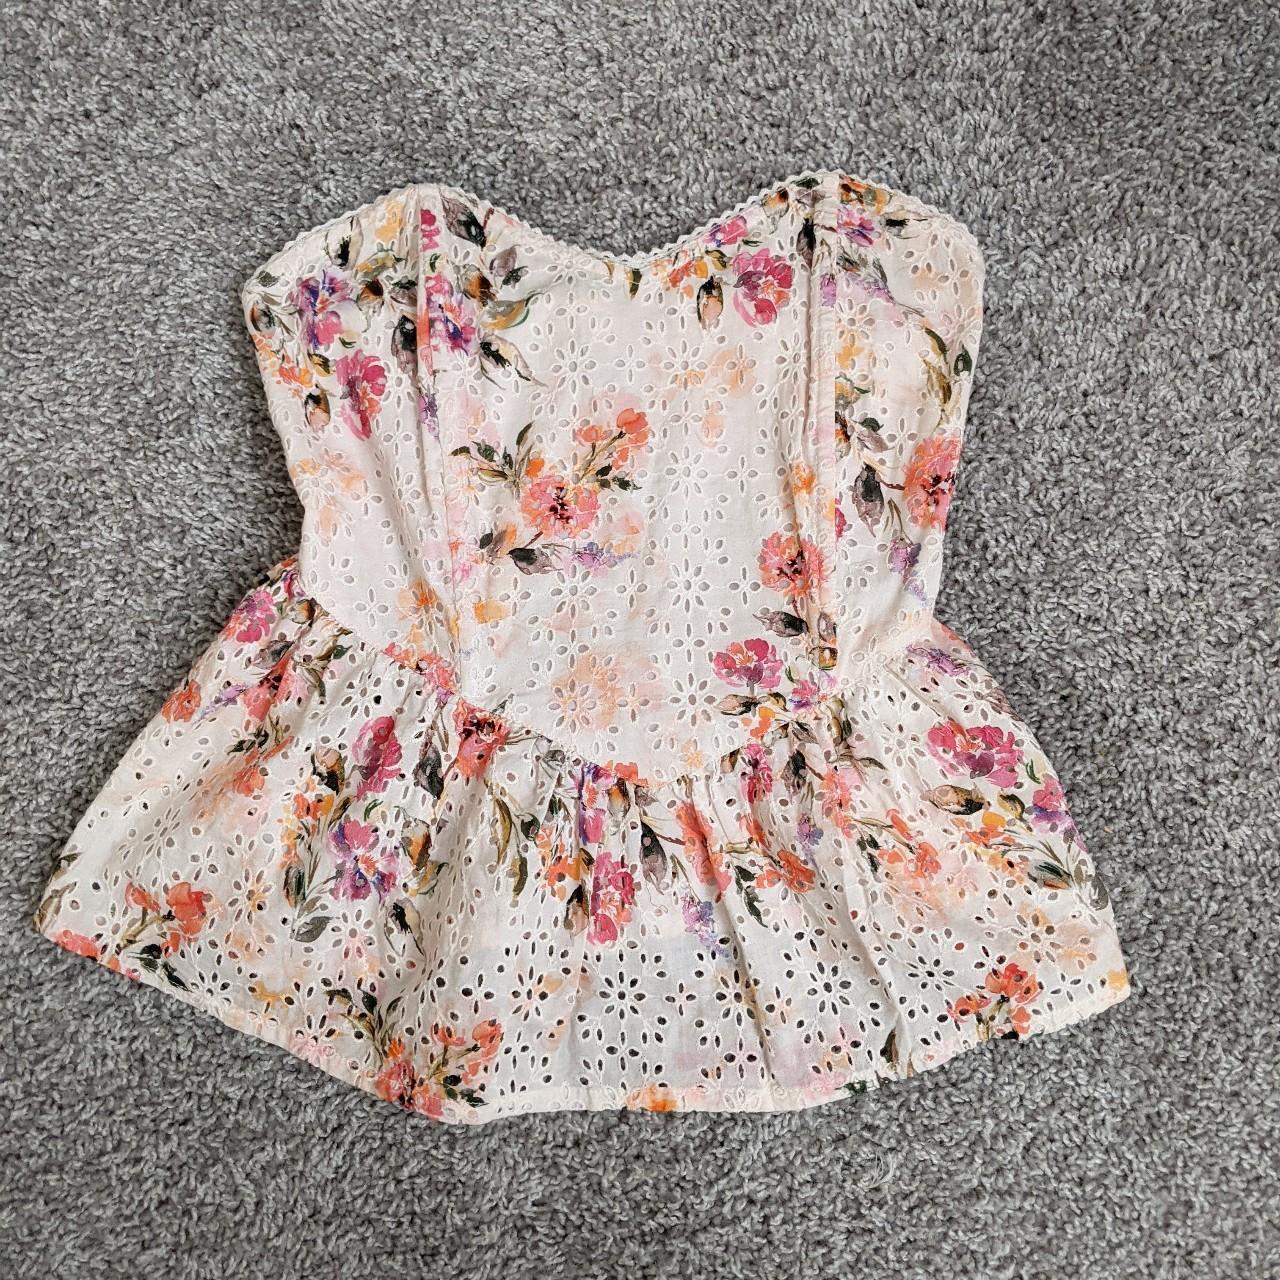 Product Image 2 - River Island peplum style floral